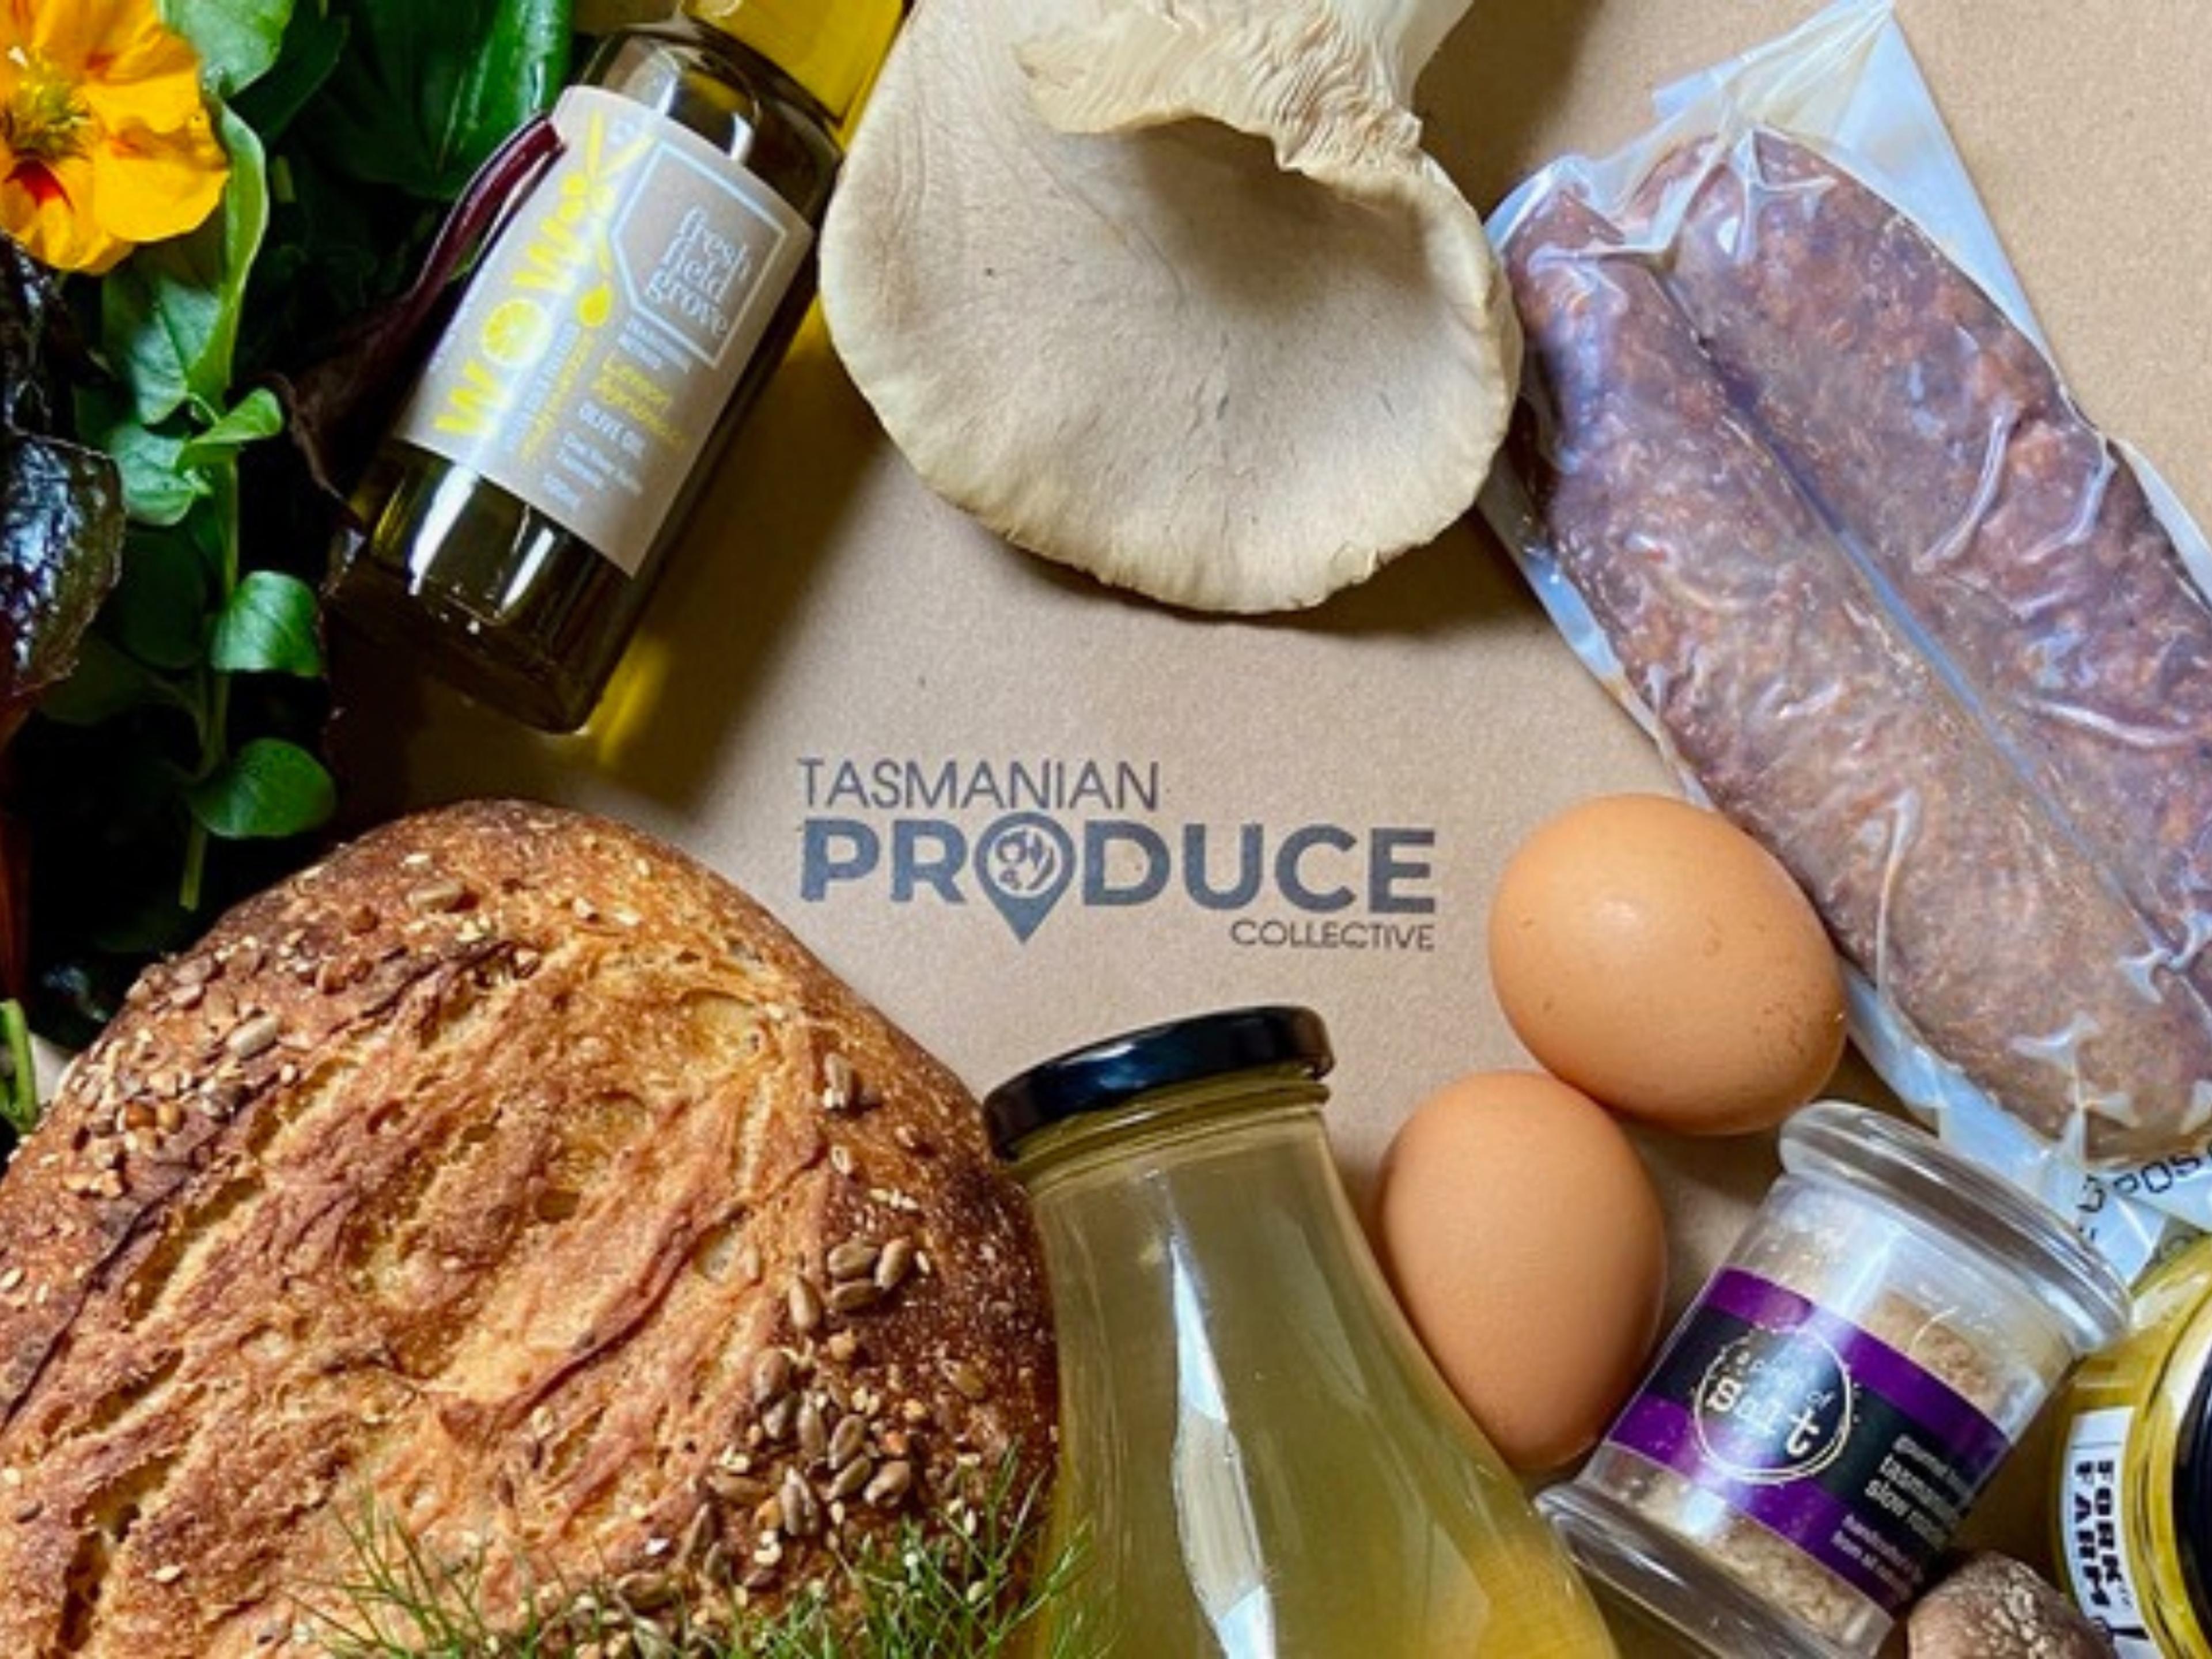 A range of local produce including eggs, bread and meat around the Tasmanian Produce Collective logo.